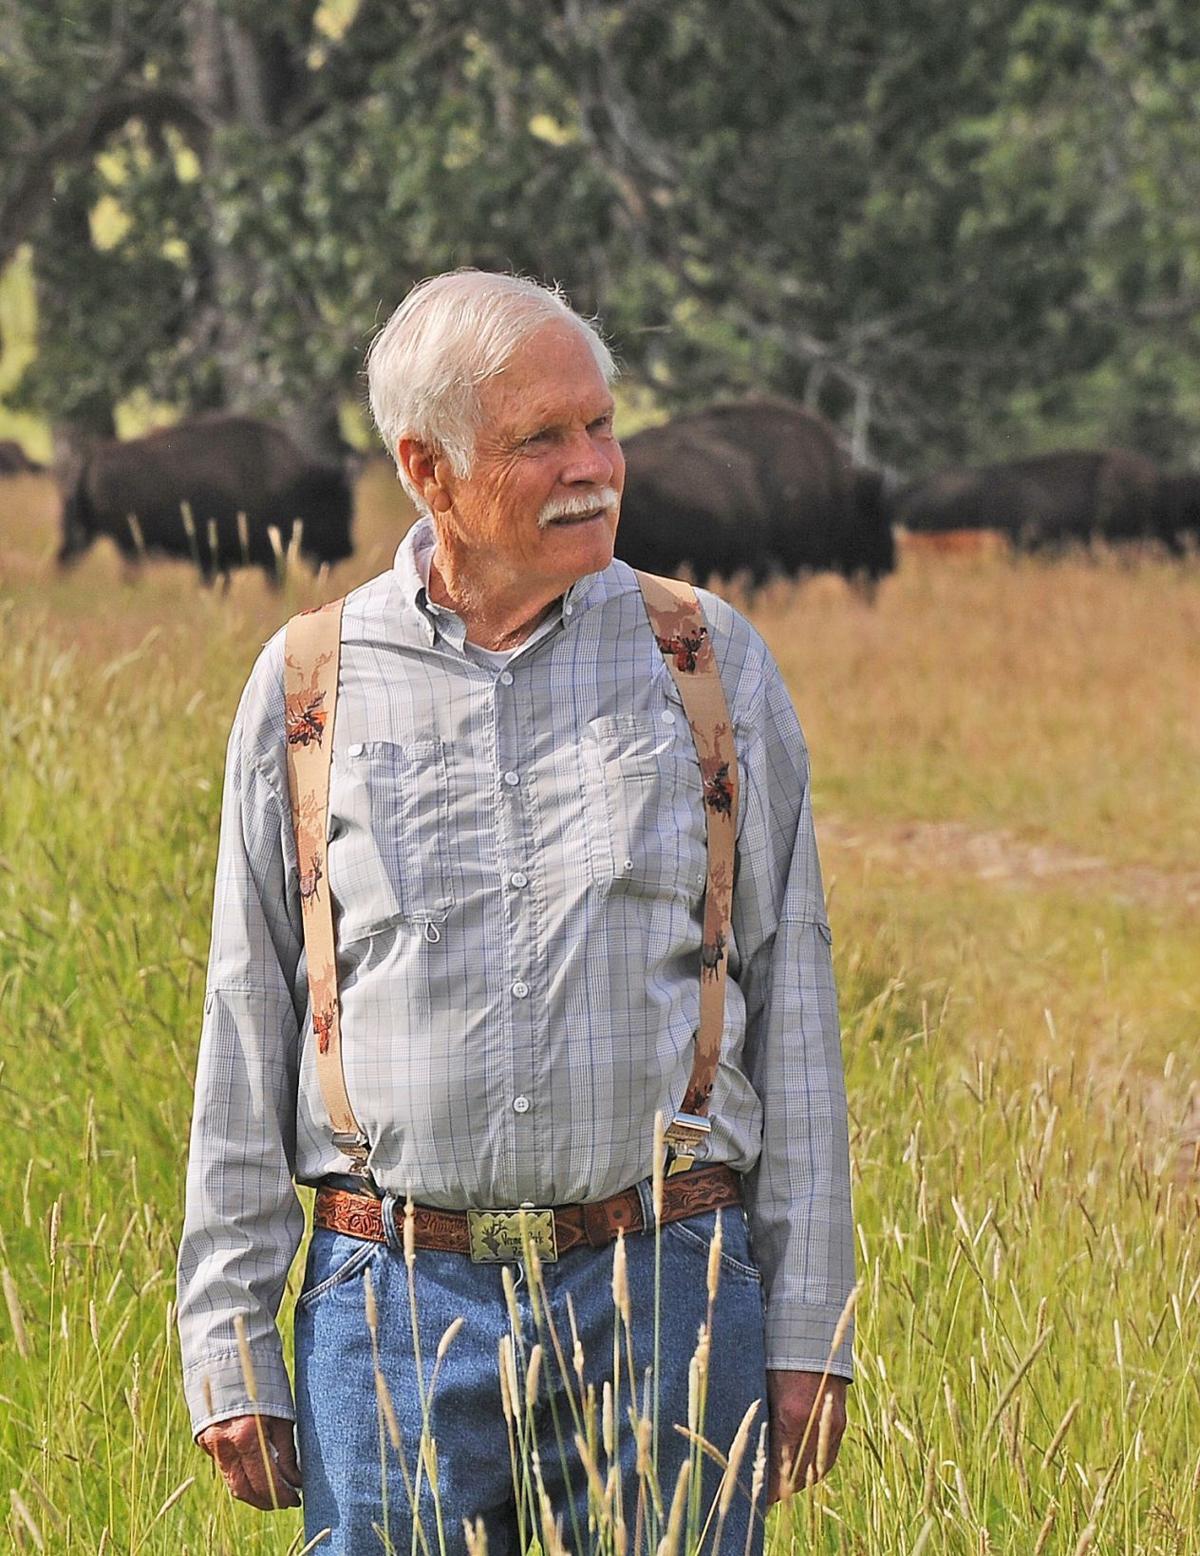 Bison enthusiasts gather at Ted Turner's ranch to celebrate success ...